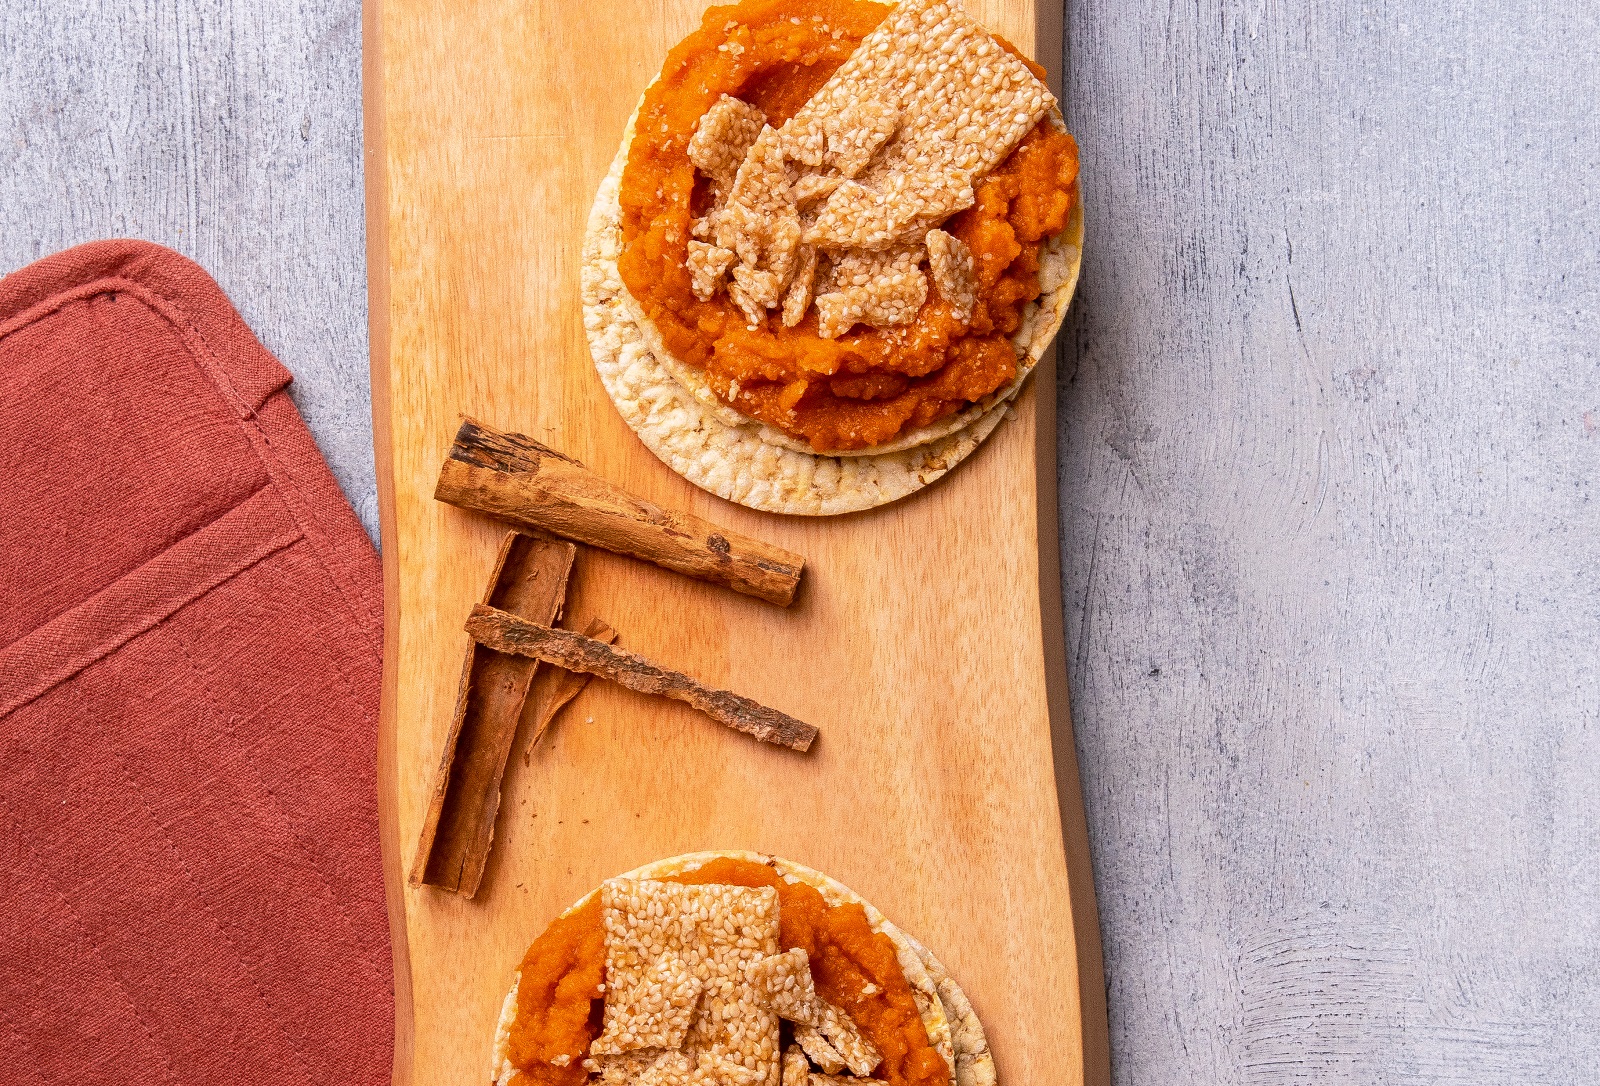 Spiced Pumpkin Smash & Sesame Snaps as a healthy treat on CORN THINS slices